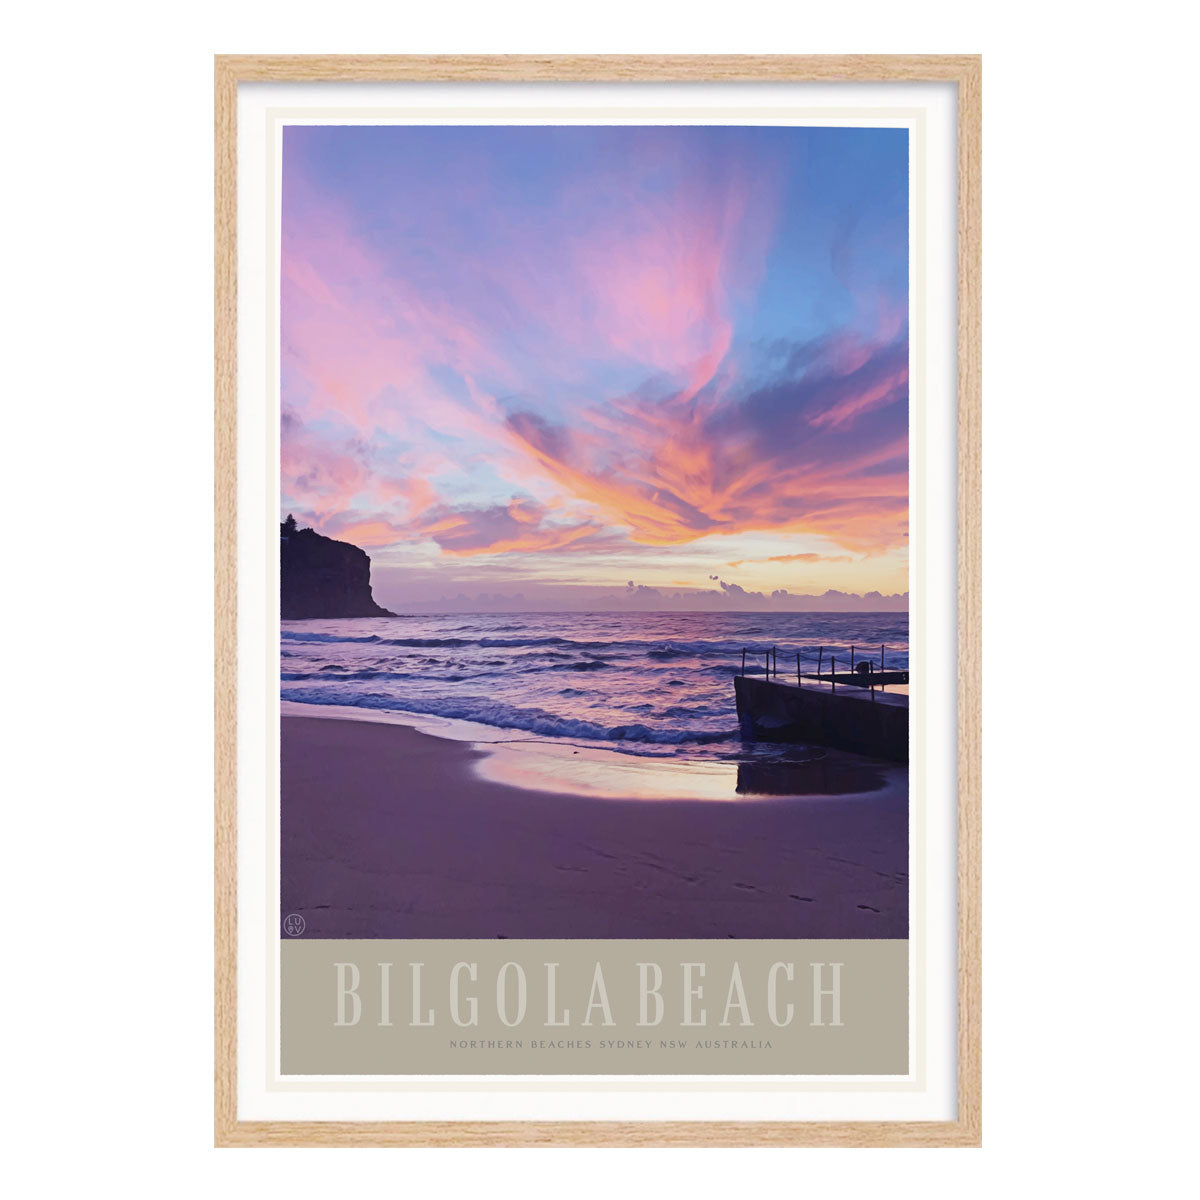 Bilgola Beach retro vintage travel poster print in oak frame from Places We Luv